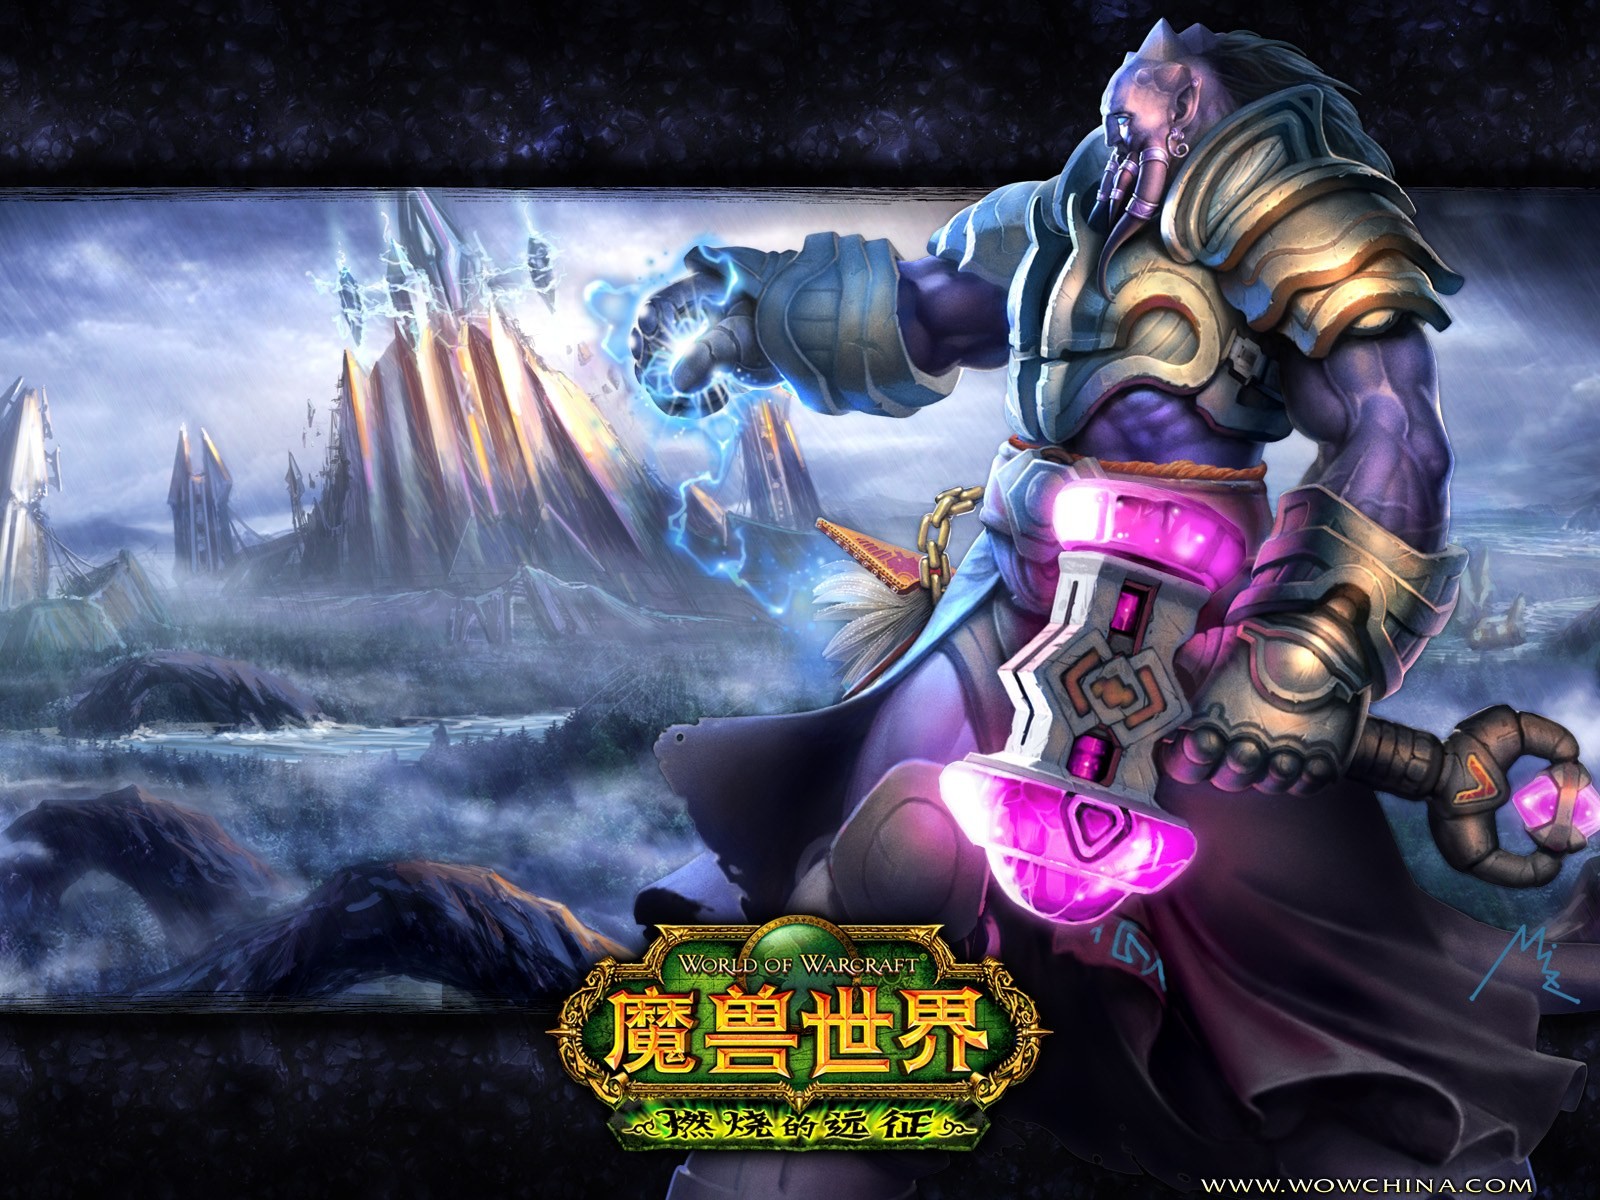 World of Warcraft: The Burning Crusade's official wallpaper (1) #17 - 1600x1200